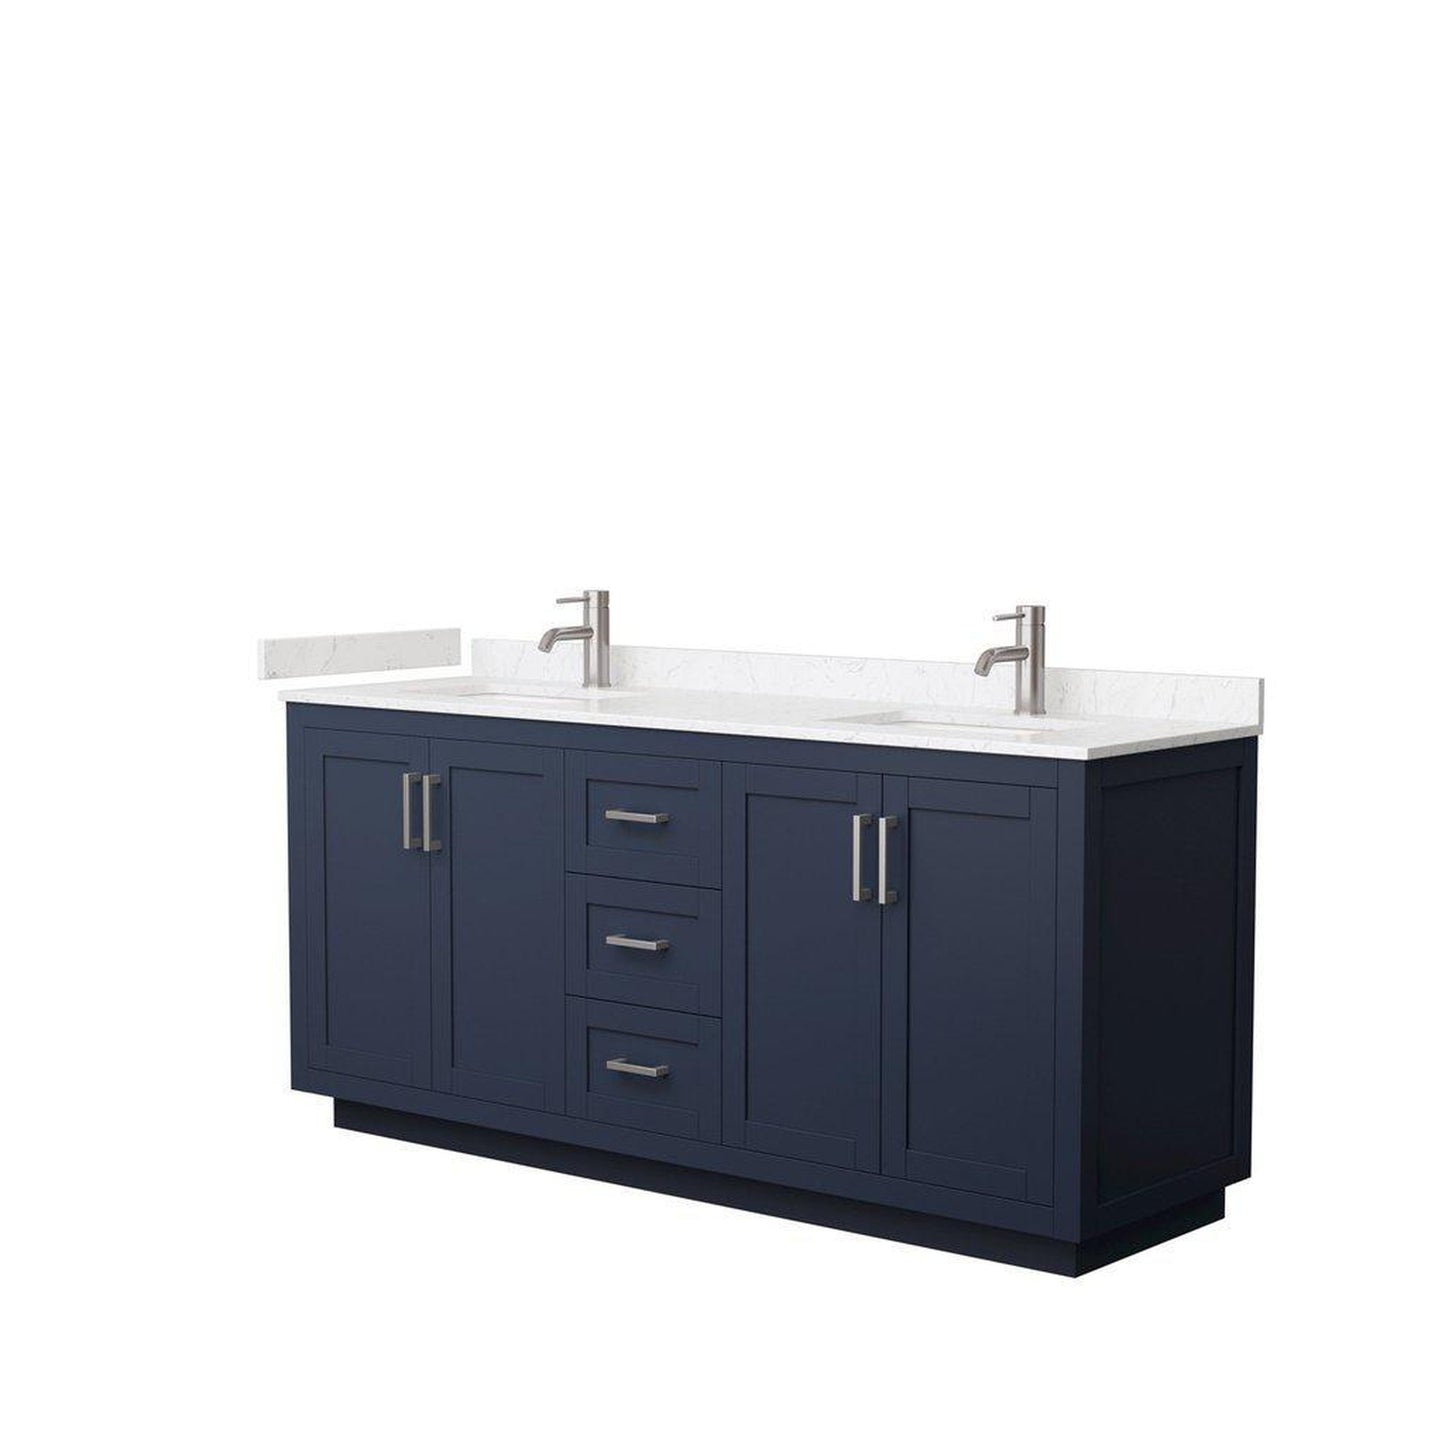 Wyndham Collection Miranda 72" Double Bathroom Dark Blue Vanity Set With Light-Vein Carrara Cultured Marble Countertop, Undermount Square Sink, And Brushed Nickel Trim